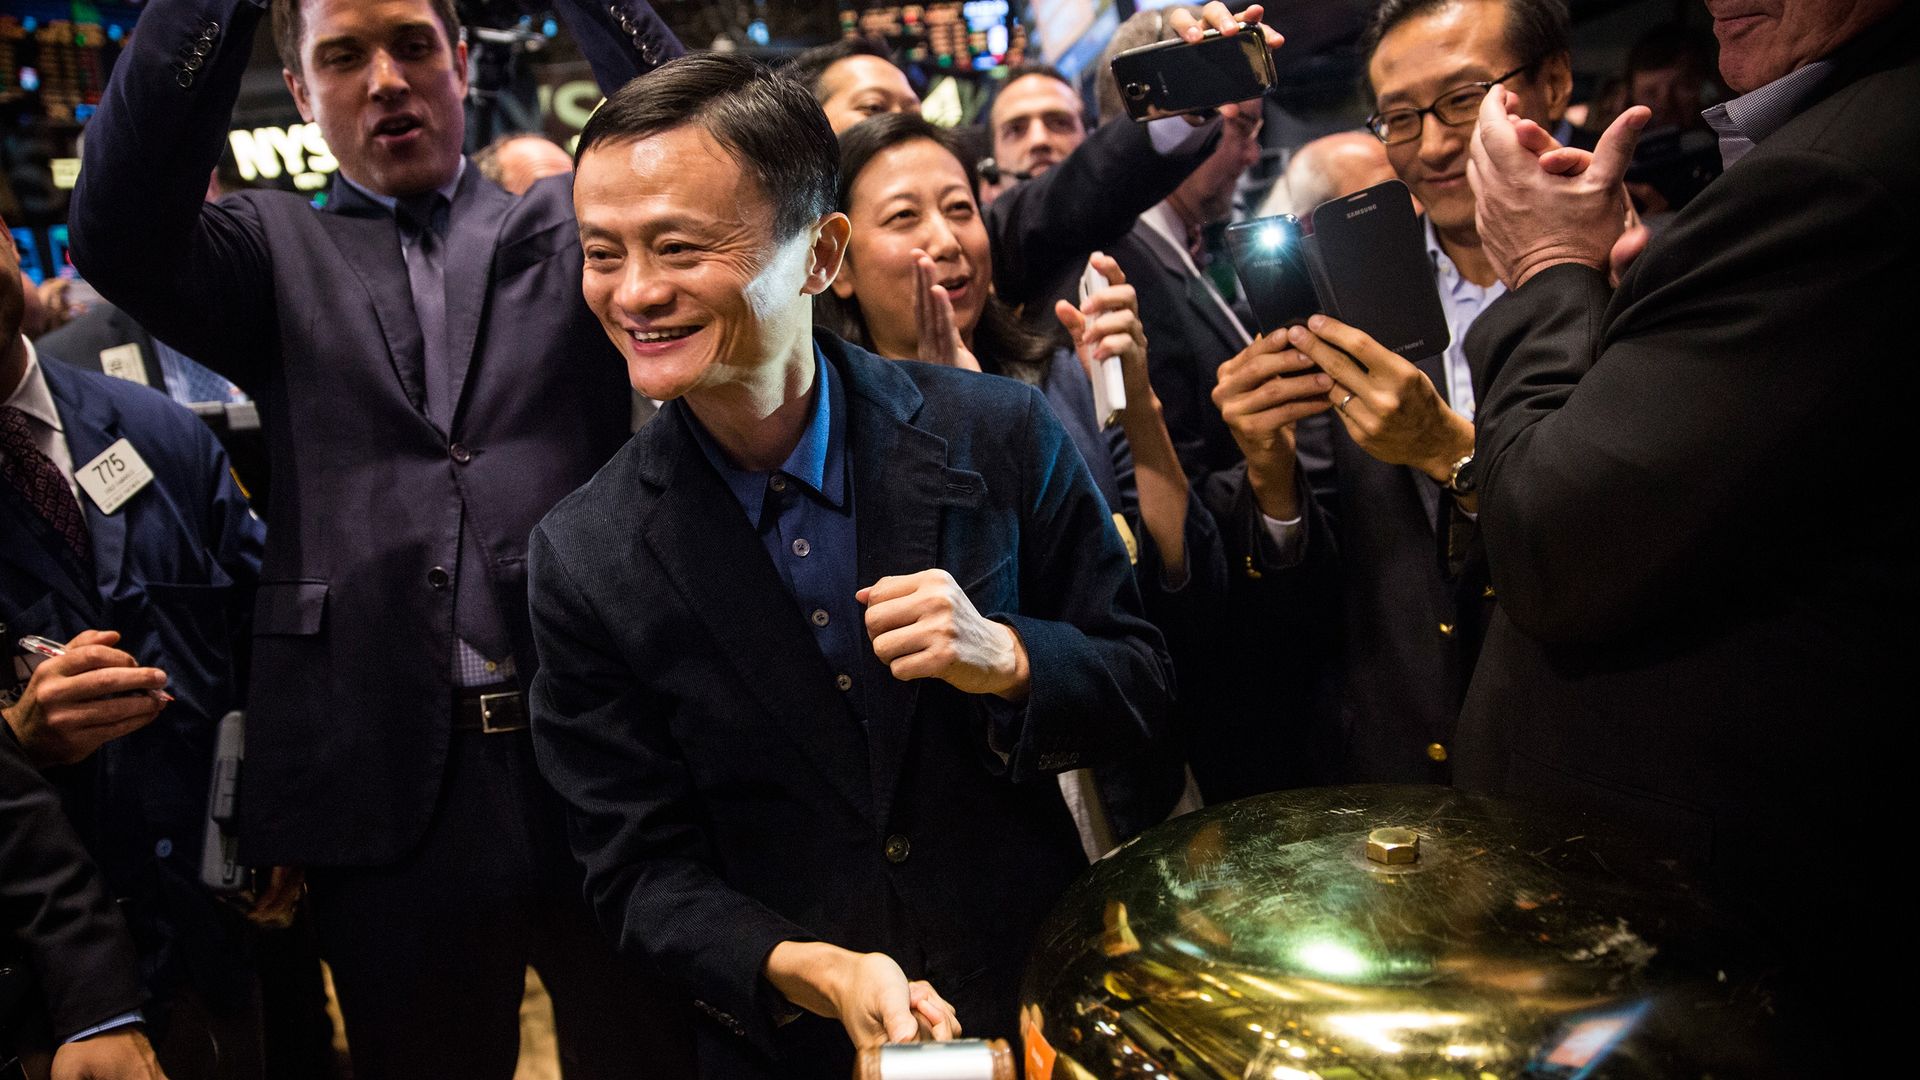 Jack Ma rings a bell, surrounded by cheering people